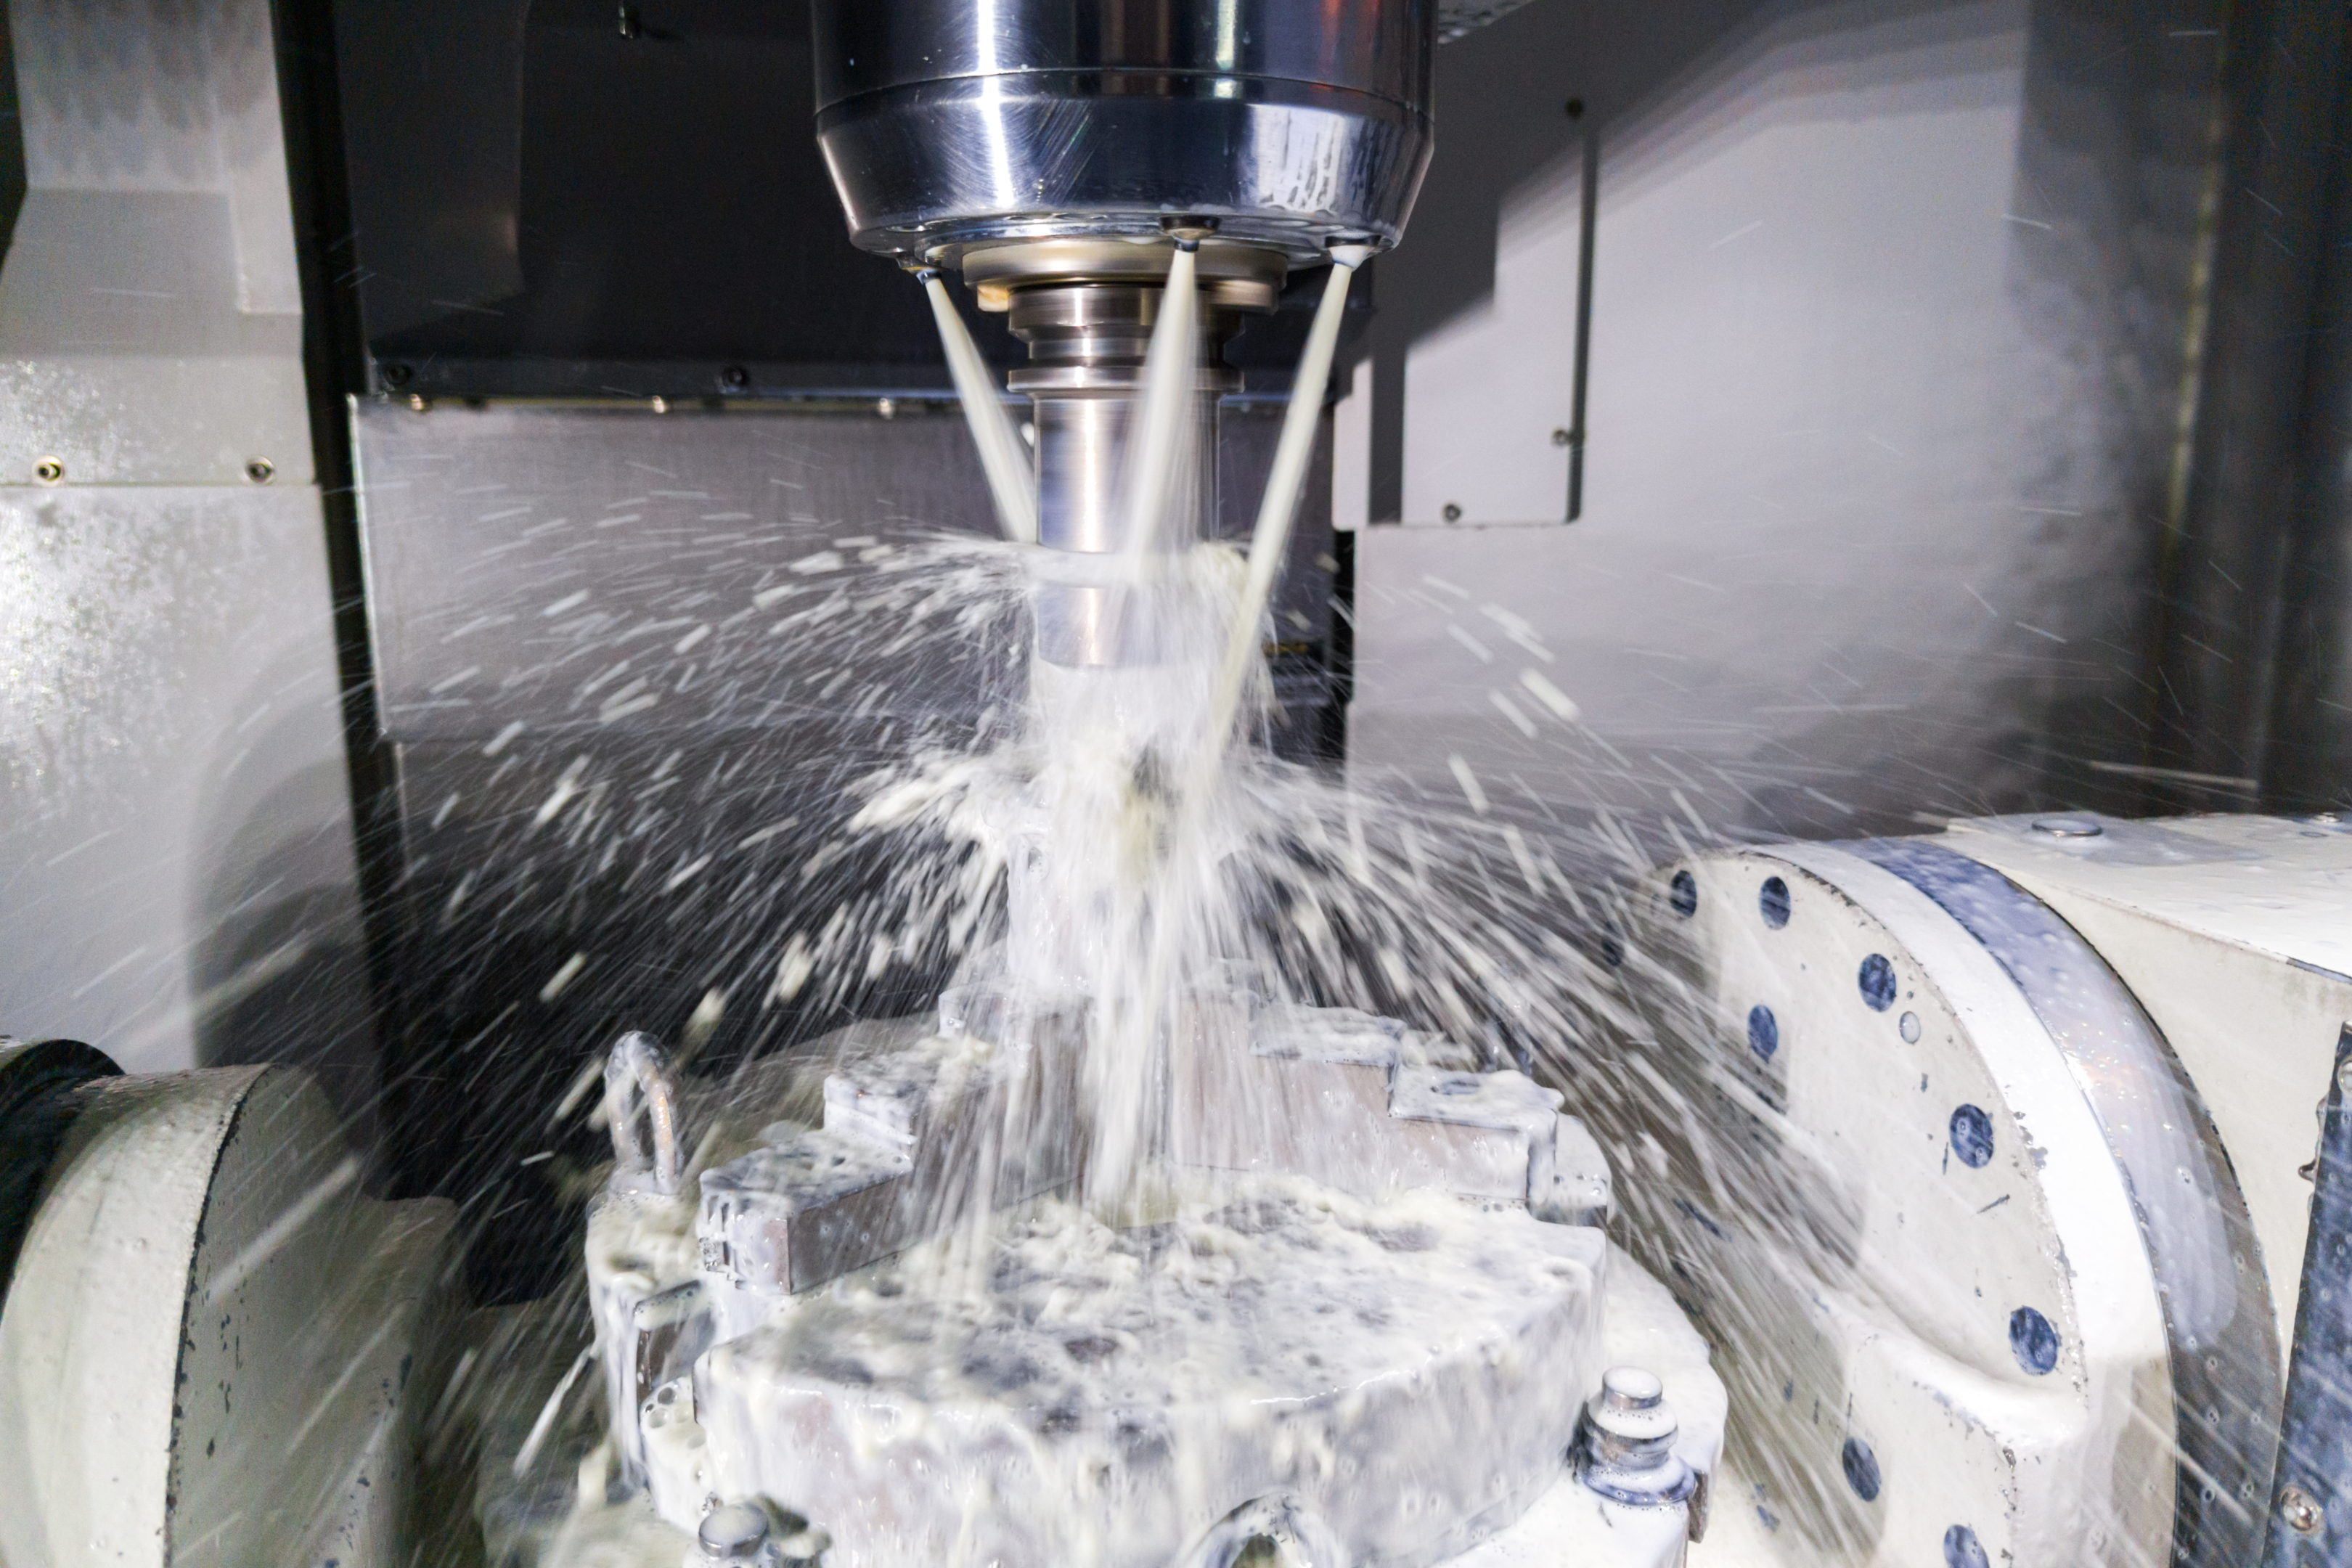 5-Axis Machining center producing a prototype